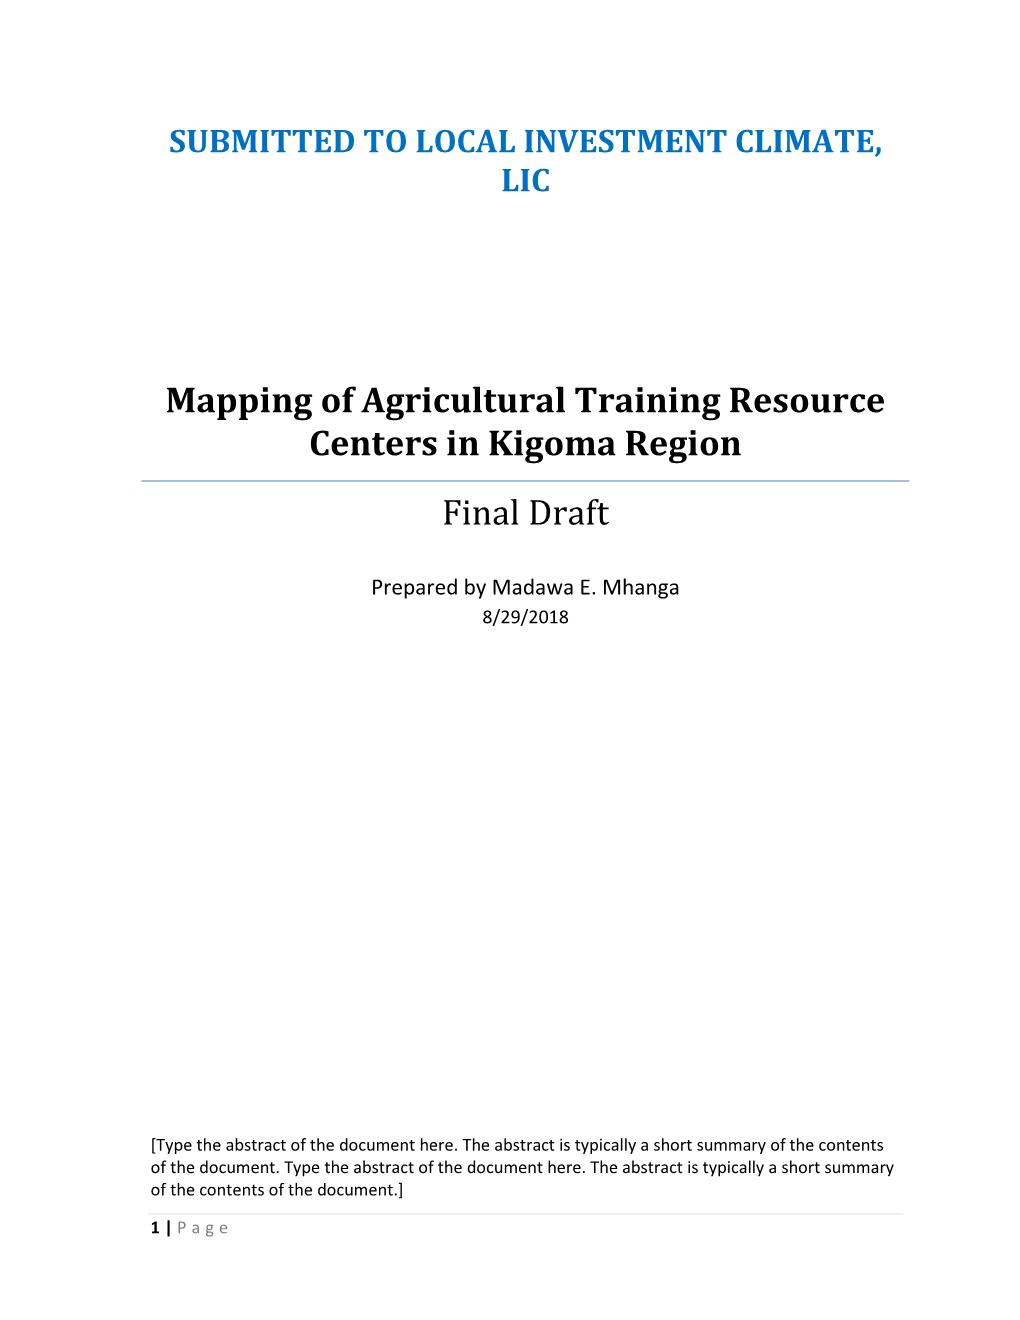 Mapping of Agricultural Resource Centers in Kigoma, August 2018